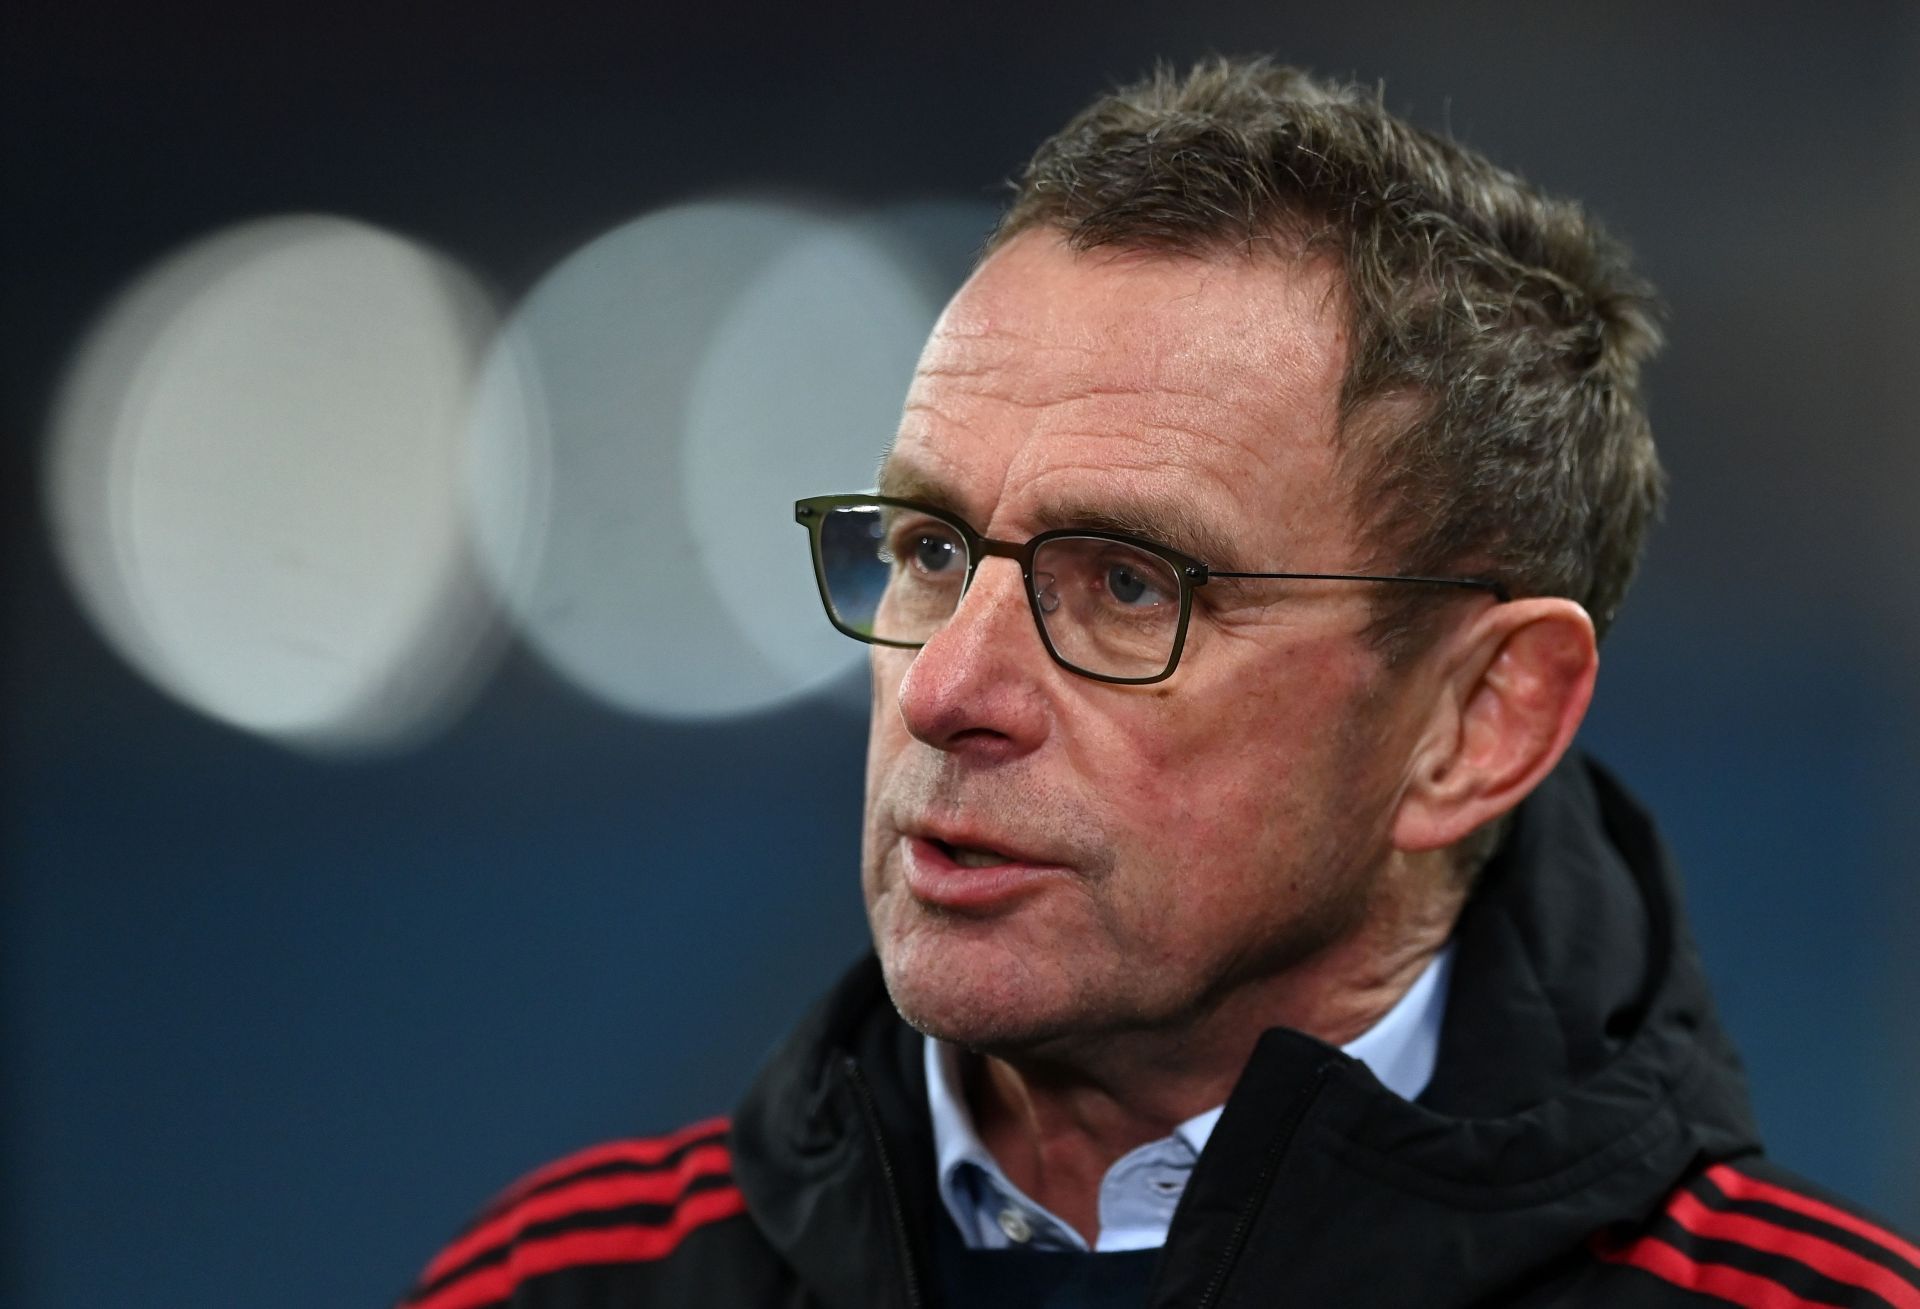 Ralf Rangnick has moved to praise three of his players